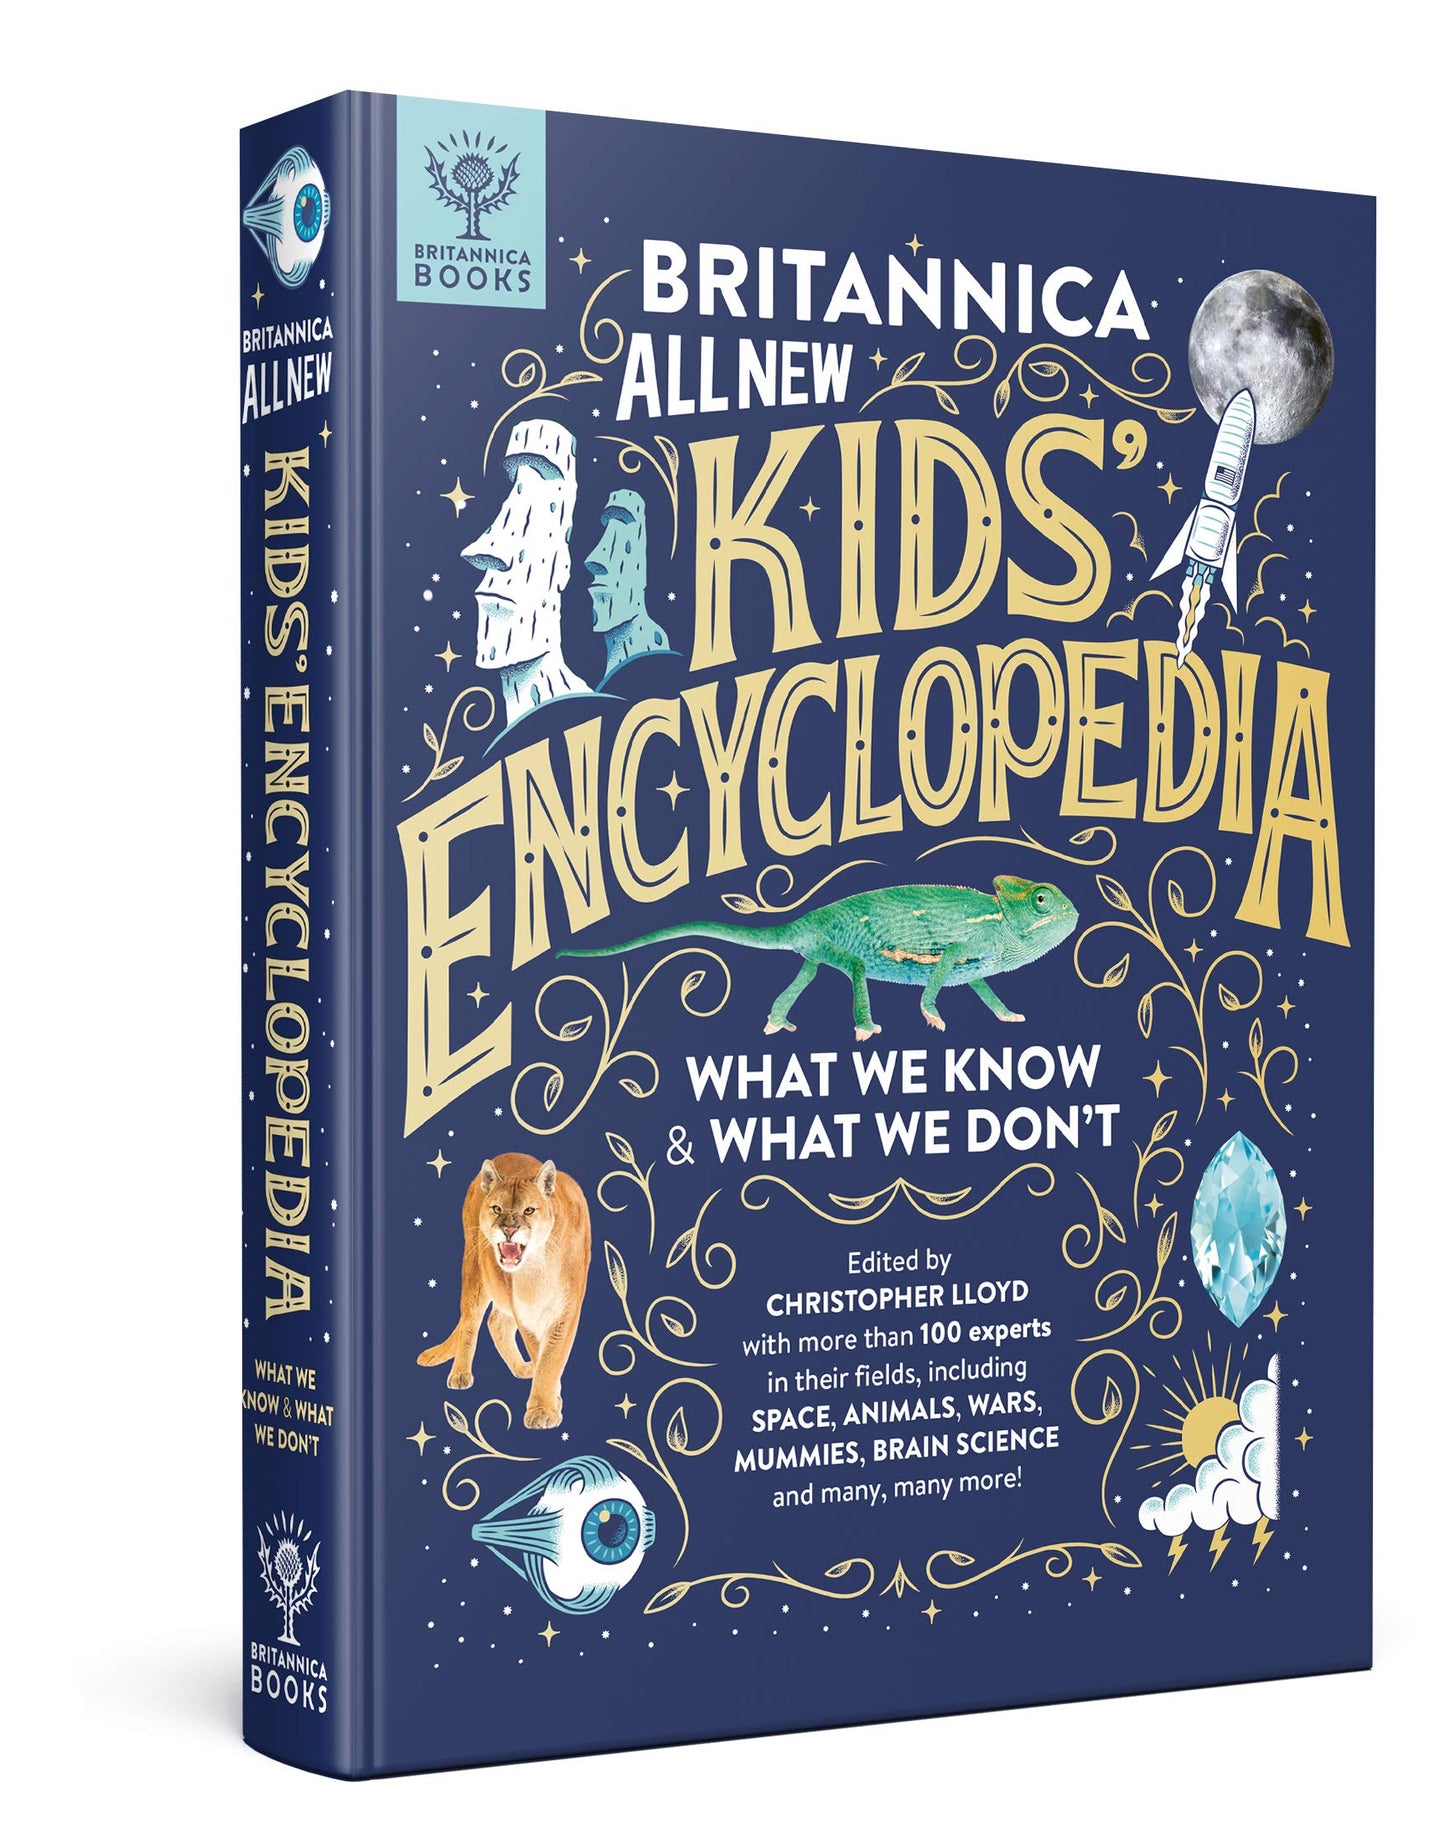 Britannica All New Kids' Encyclopedia: What We Know & What We Don't